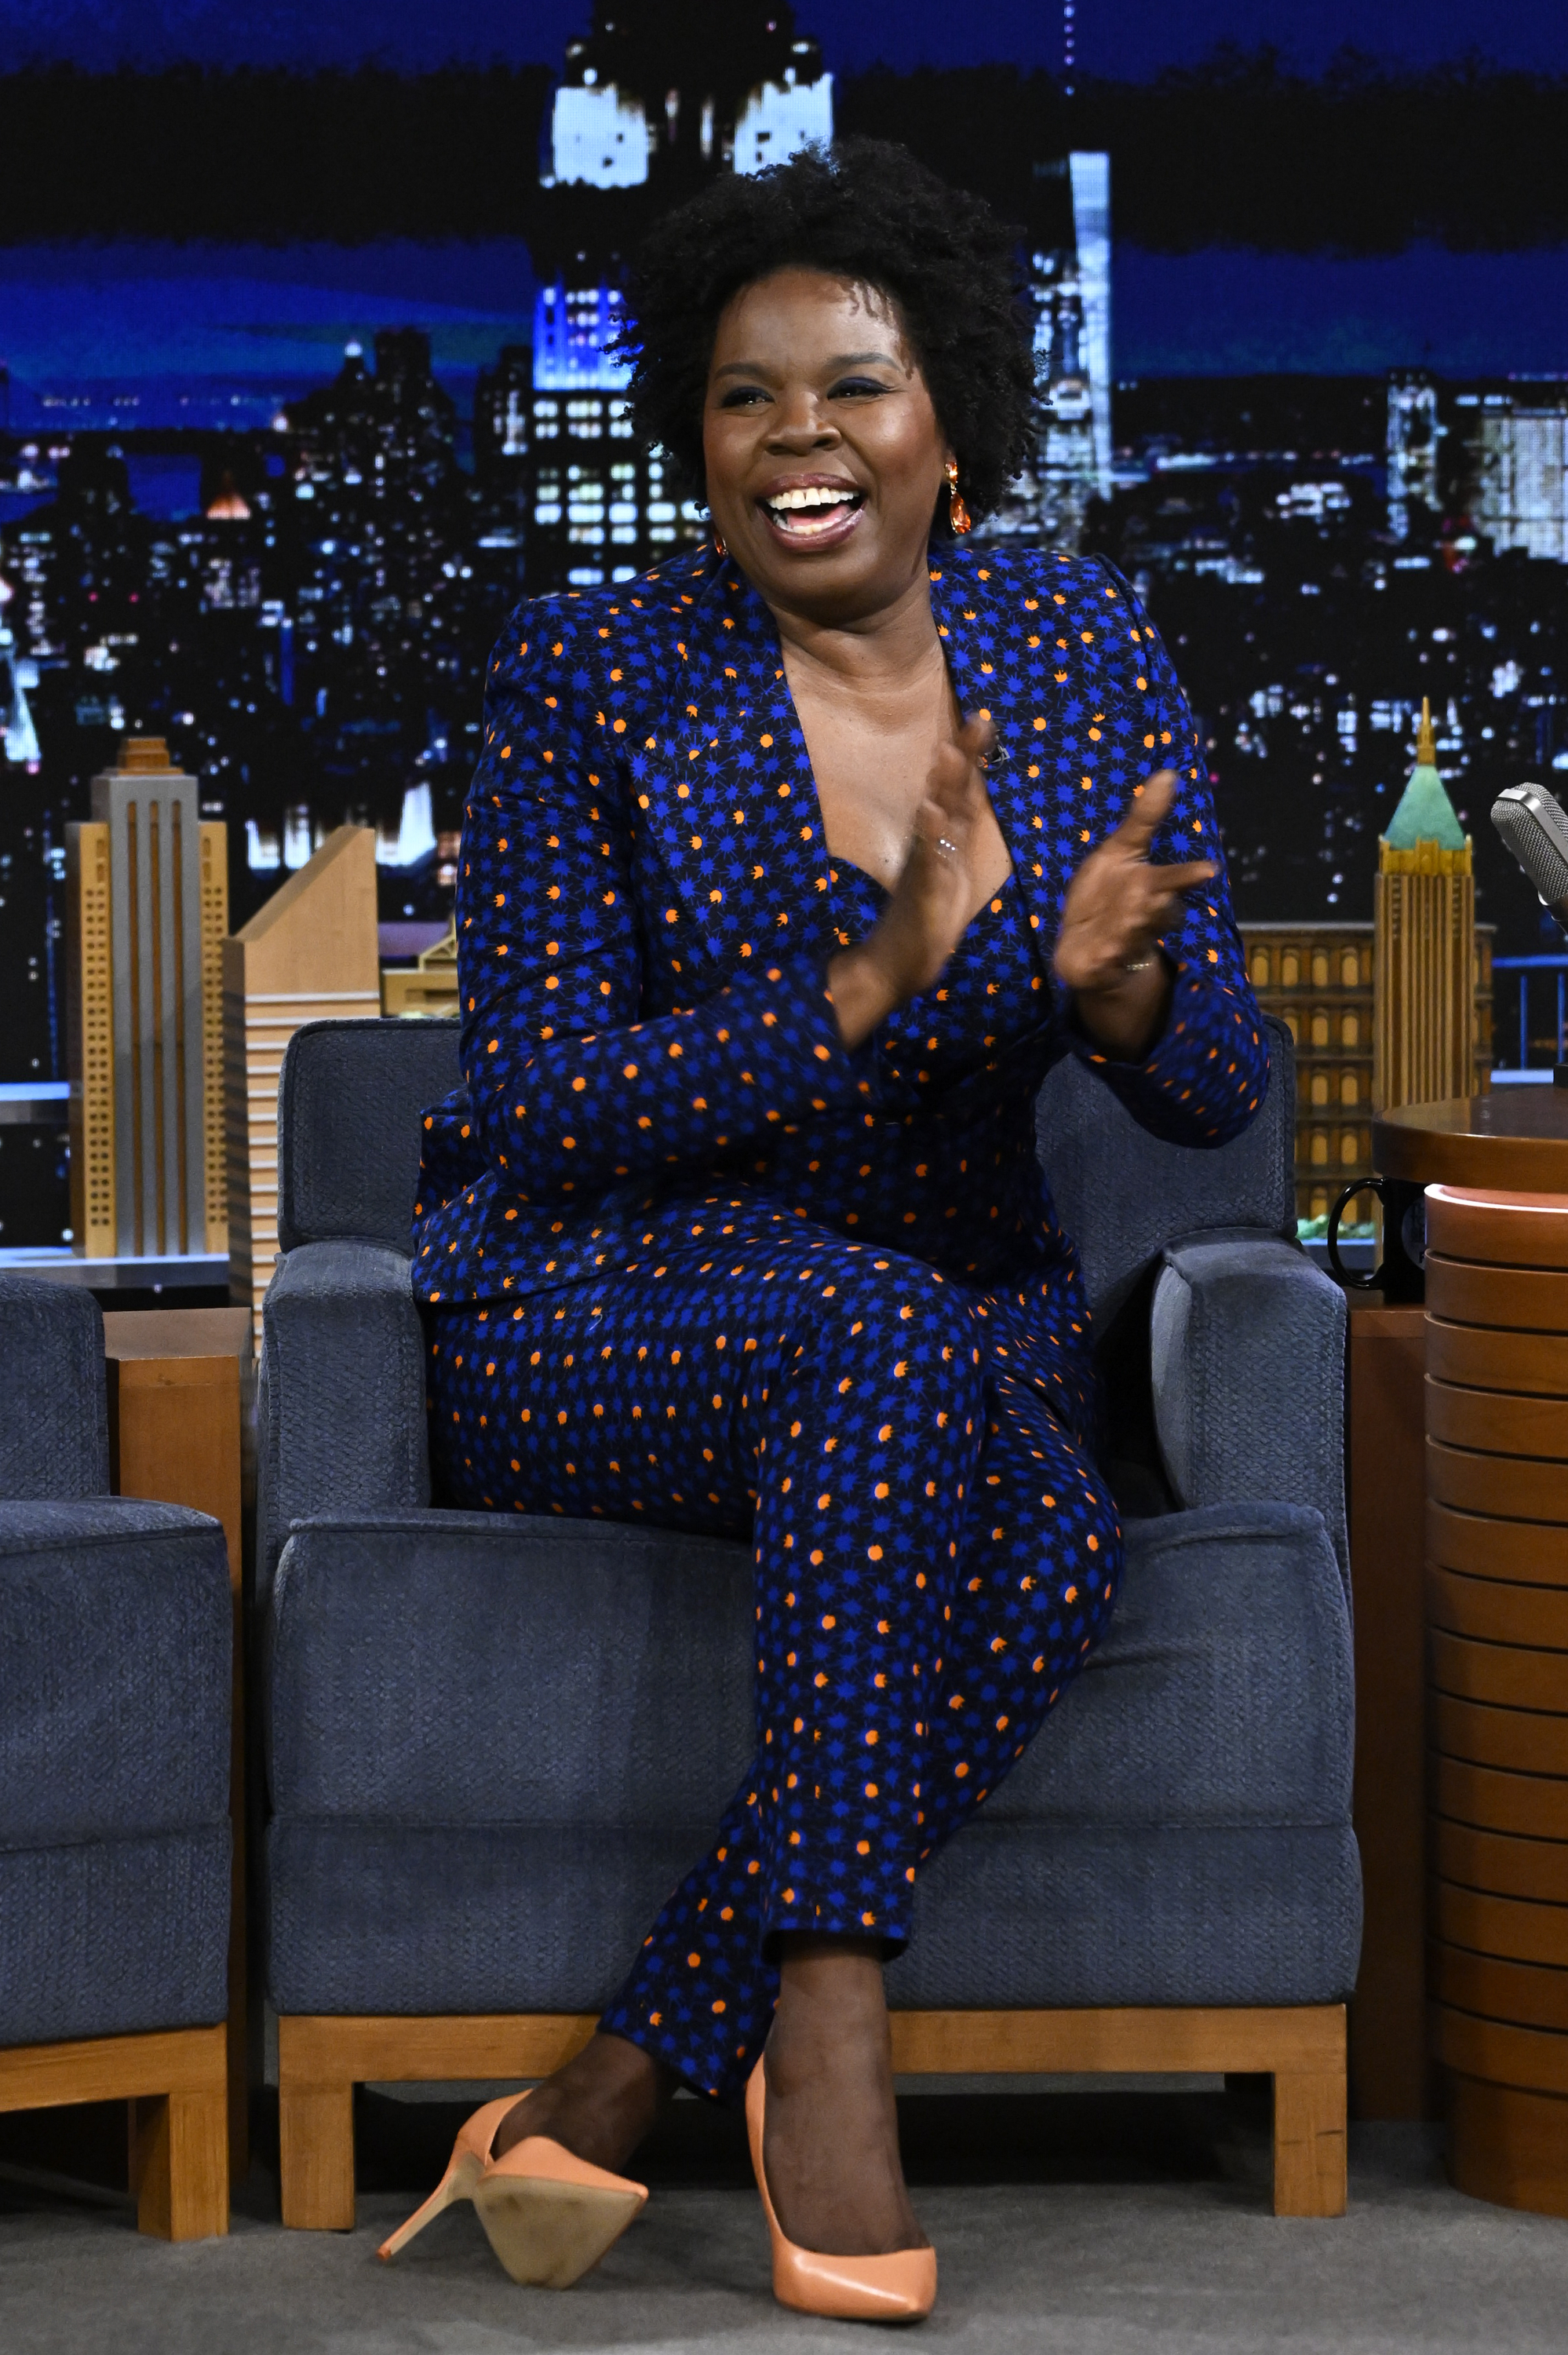 Closeup of Leslie Jones sitting on stage for a late-night TV talk show